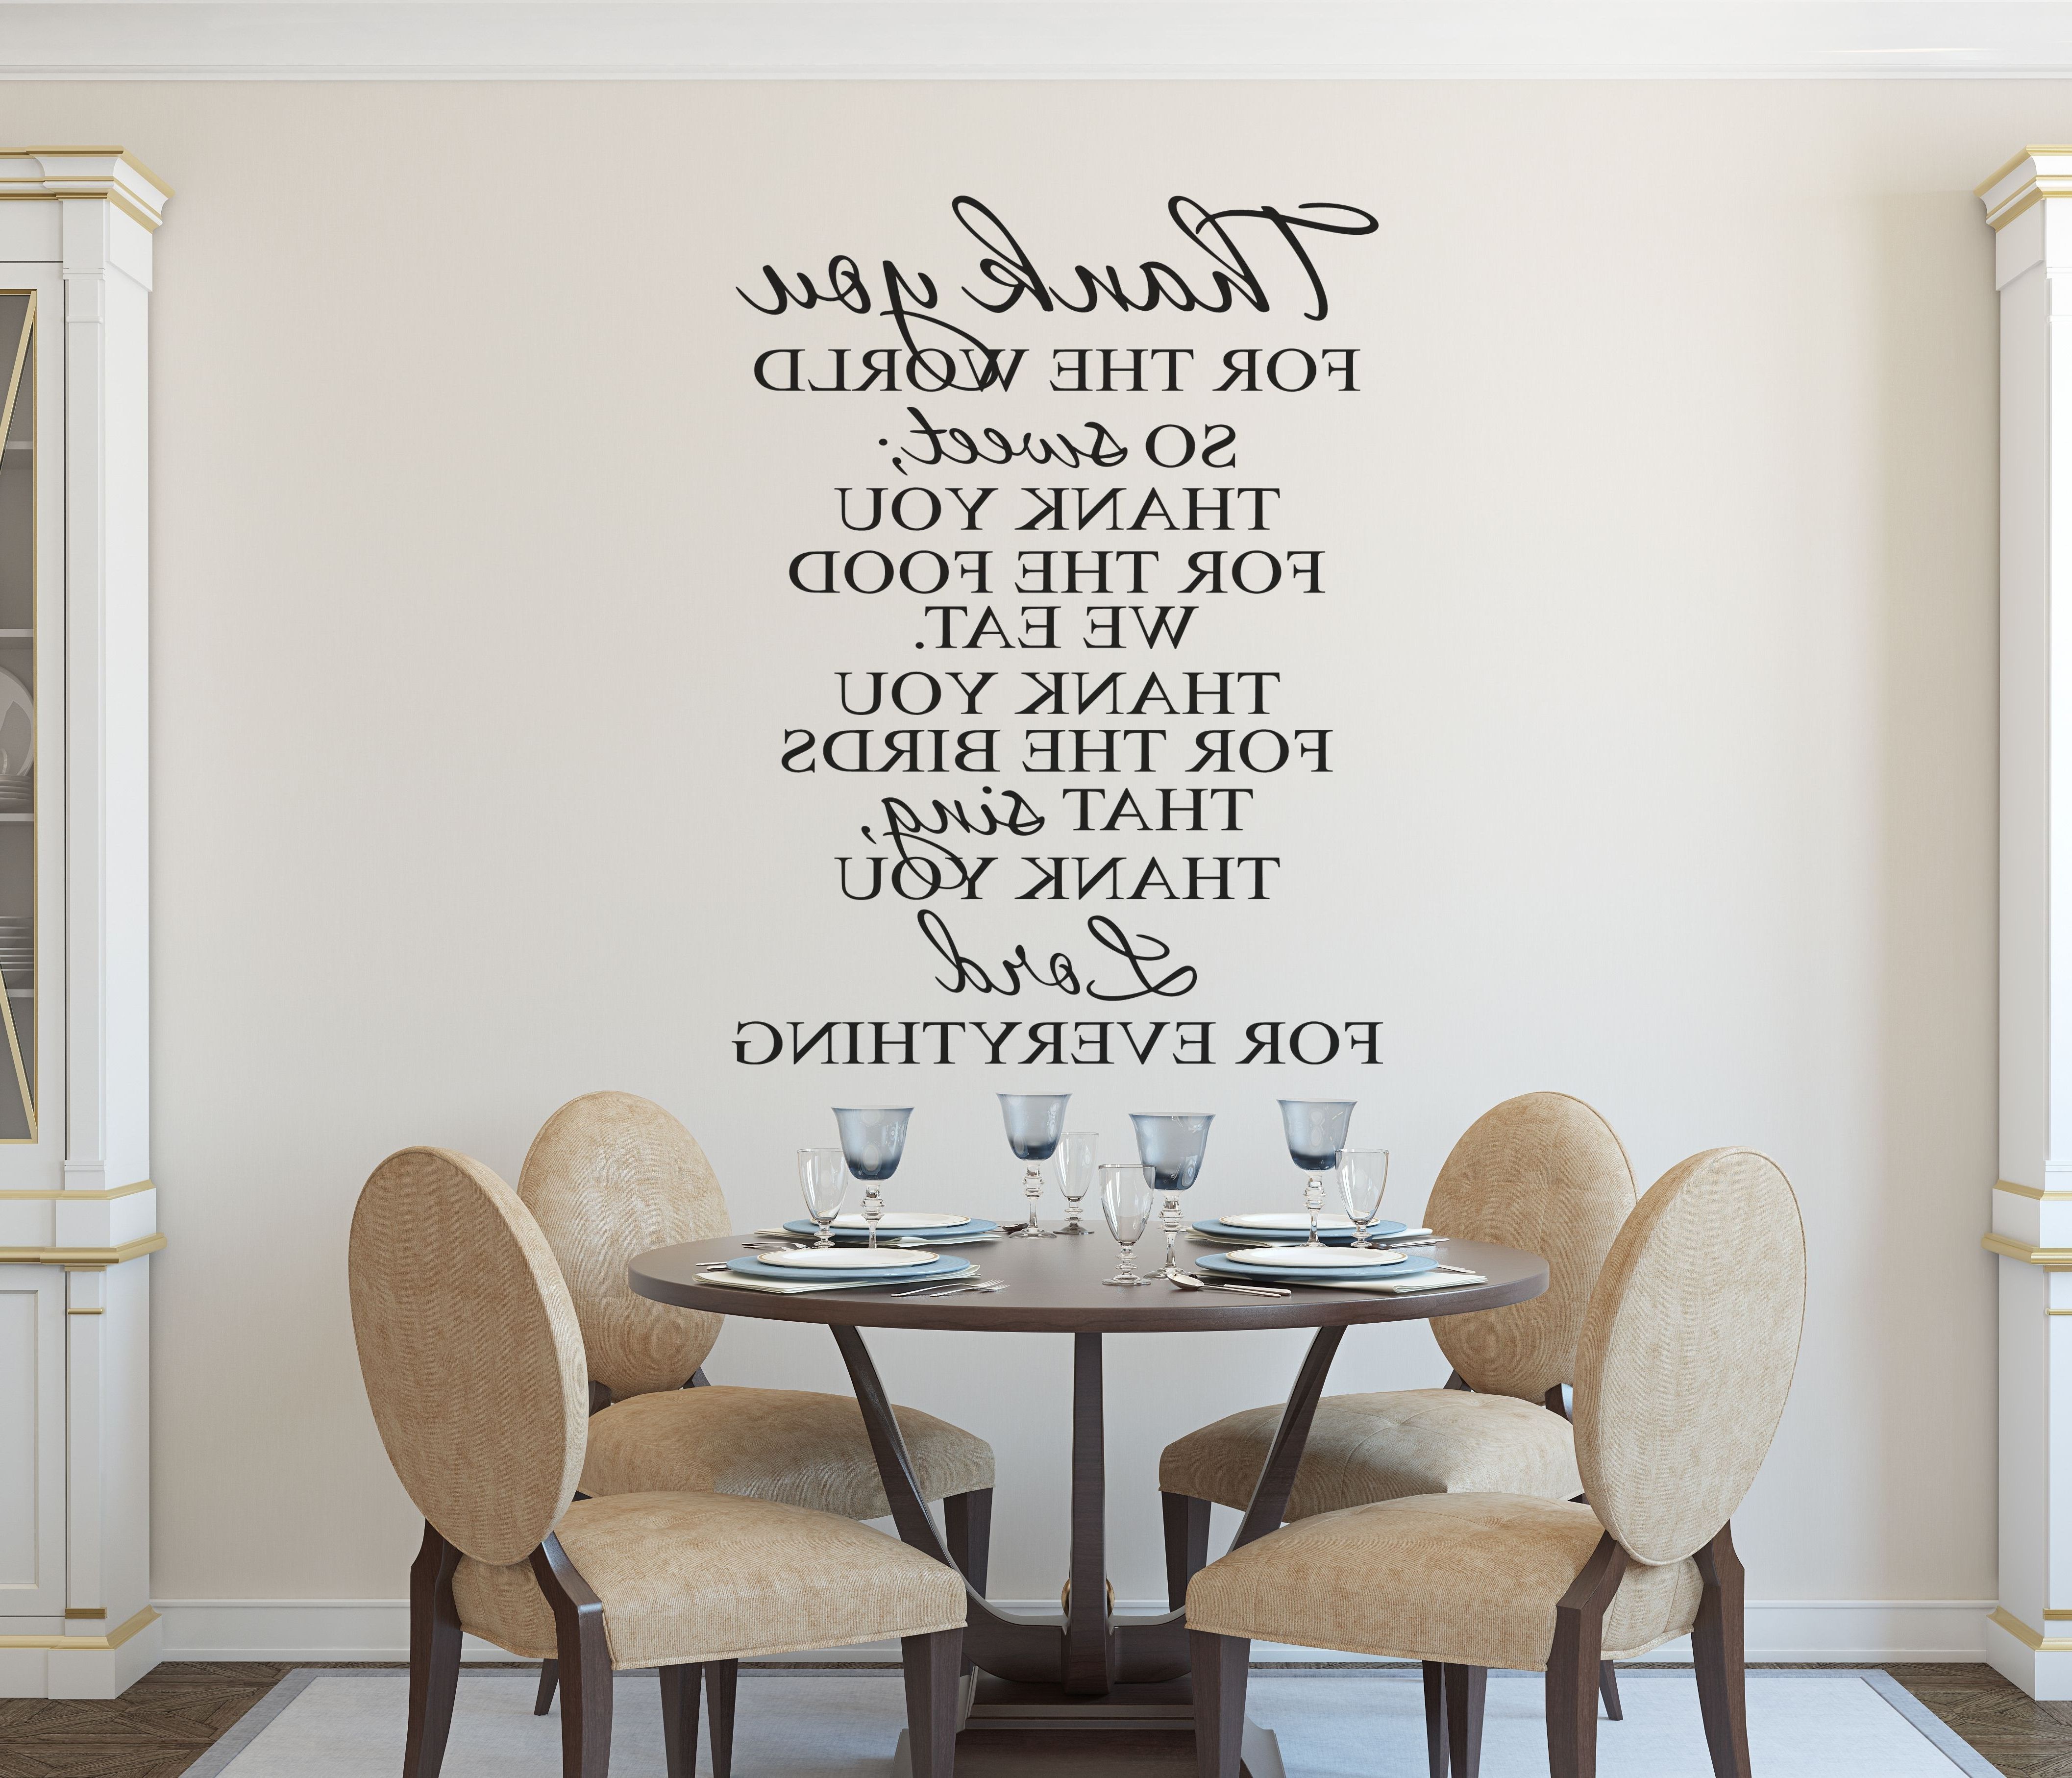 Decor: Captivating Kitchen Decals For Wall Kitchen Decoration Within Popular Wall Art Deco Decals (View 9 of 15)